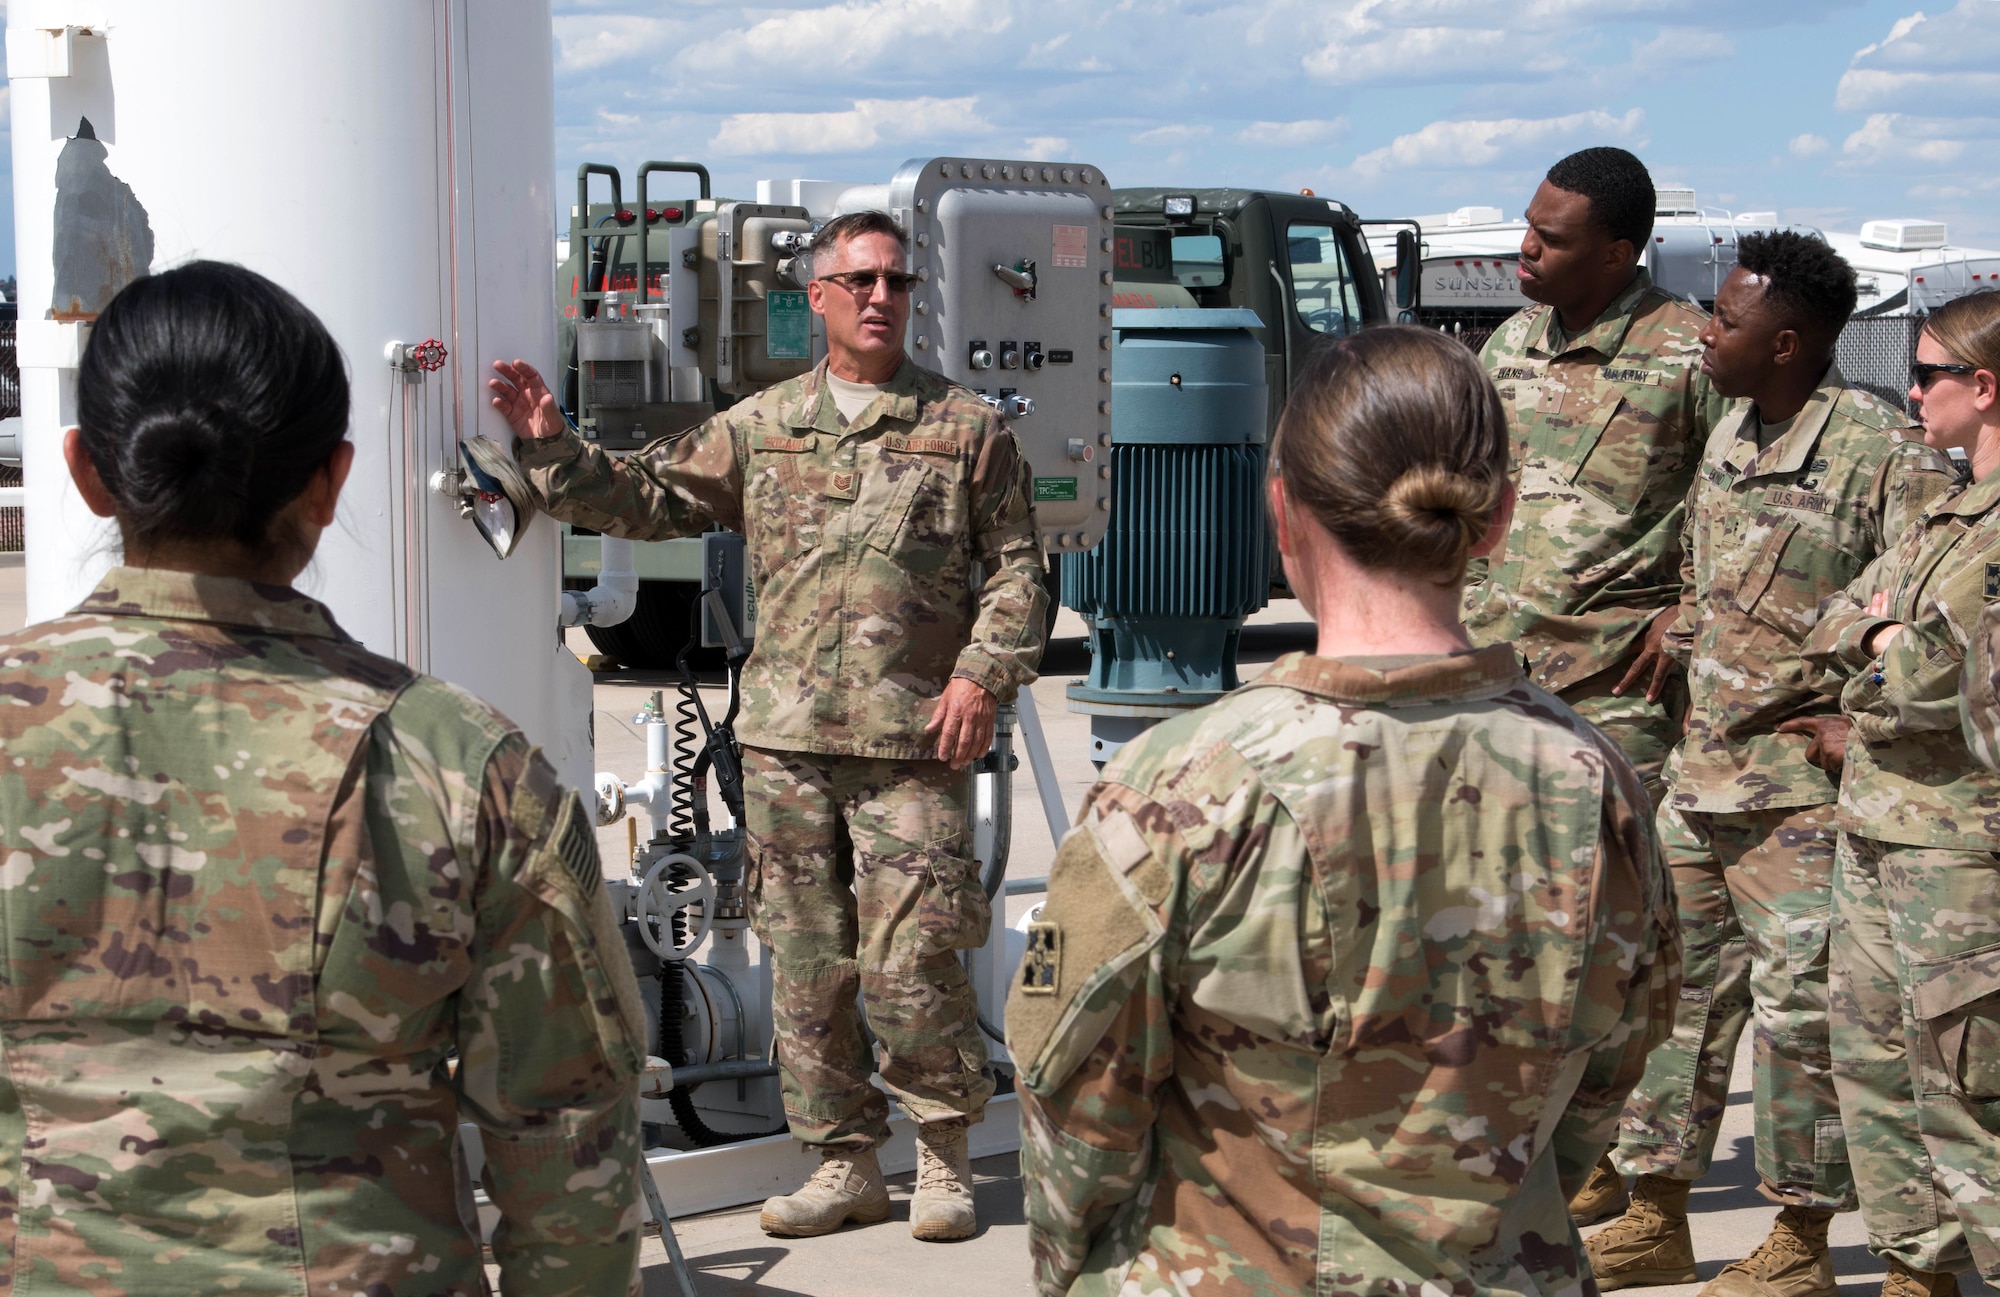 An Air Force Reservists speaks with Army Soldiers from Fort Carson at Peterson Air Force Base, Colorado, September 6, 2019.